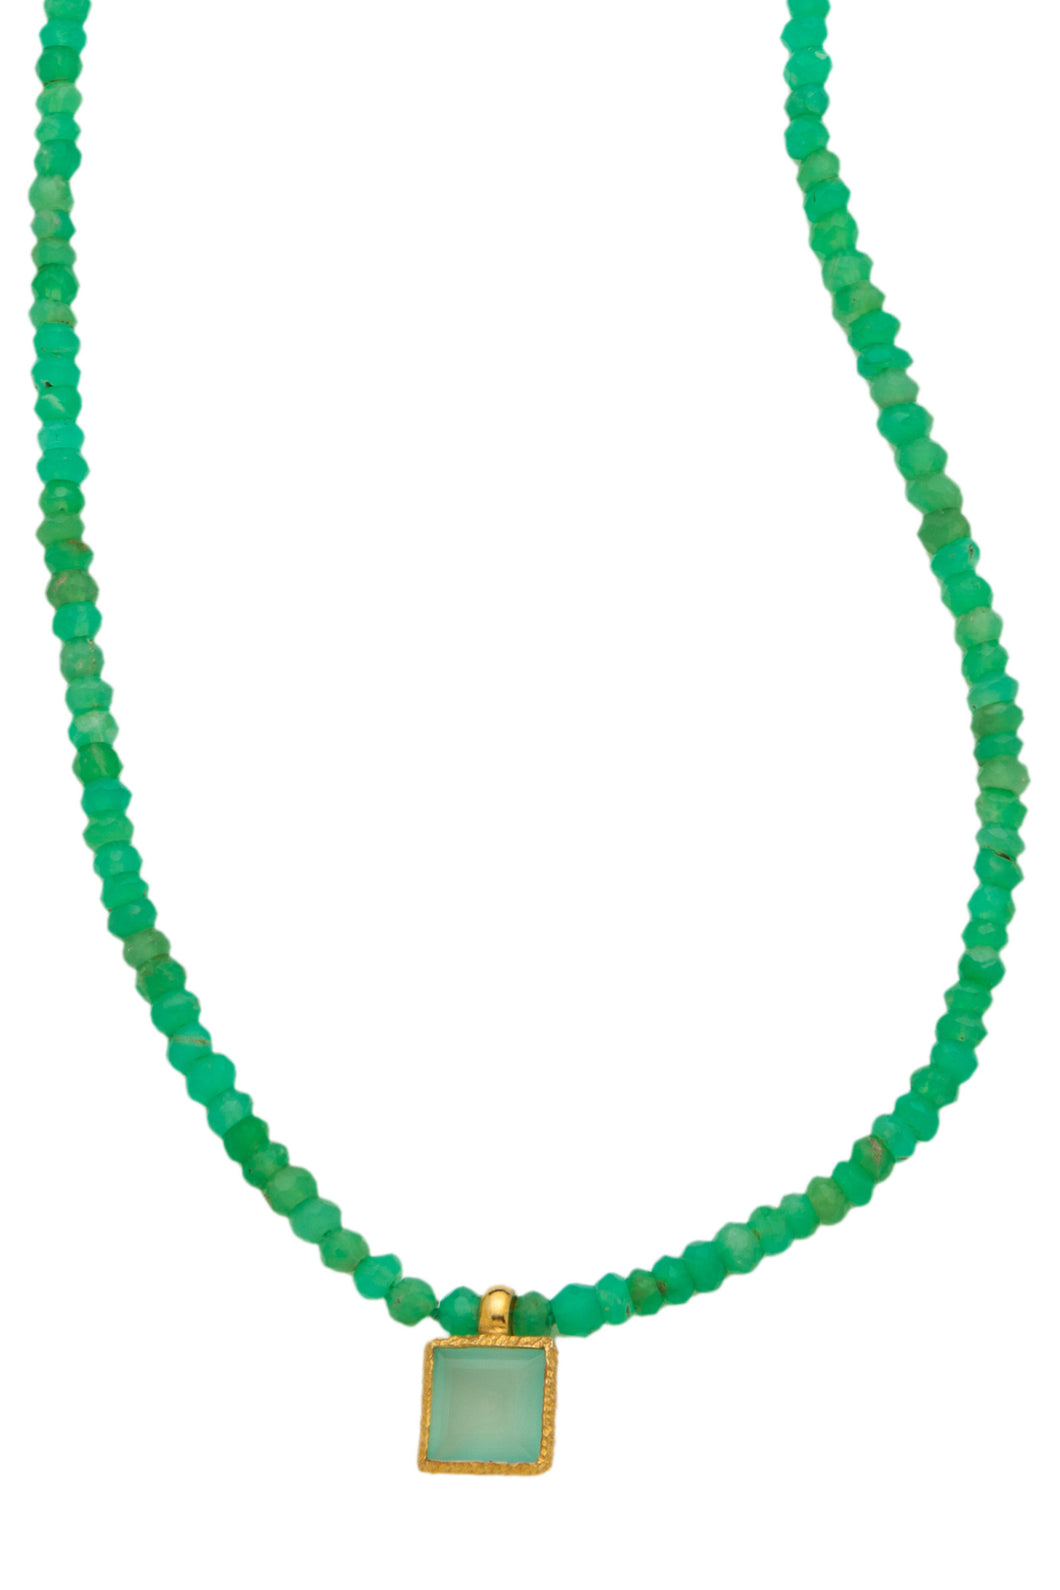 Green Chrypsoprase  Necklace with Green Chalcedony Pendant set in 24kt gold vermeil  NF188-Chr